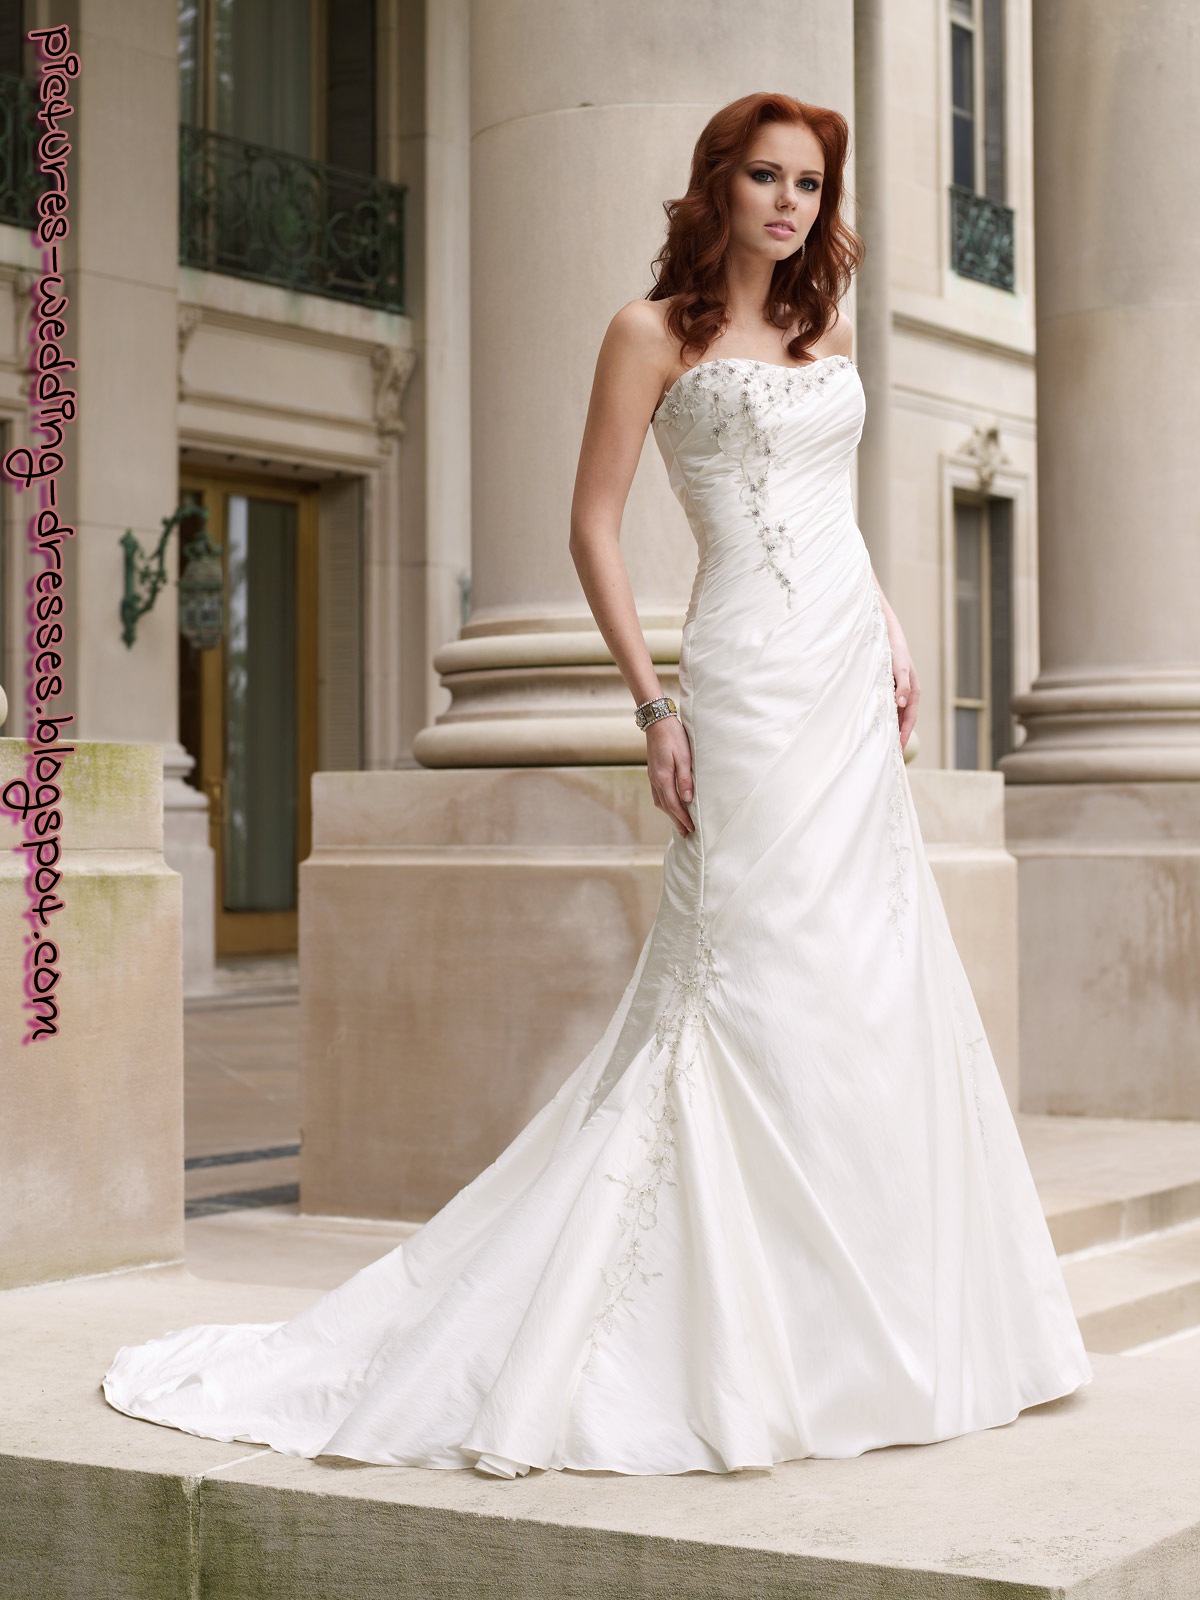 Photos Wedding  Dresses  Photos Formal Bridal  Gowns  and 